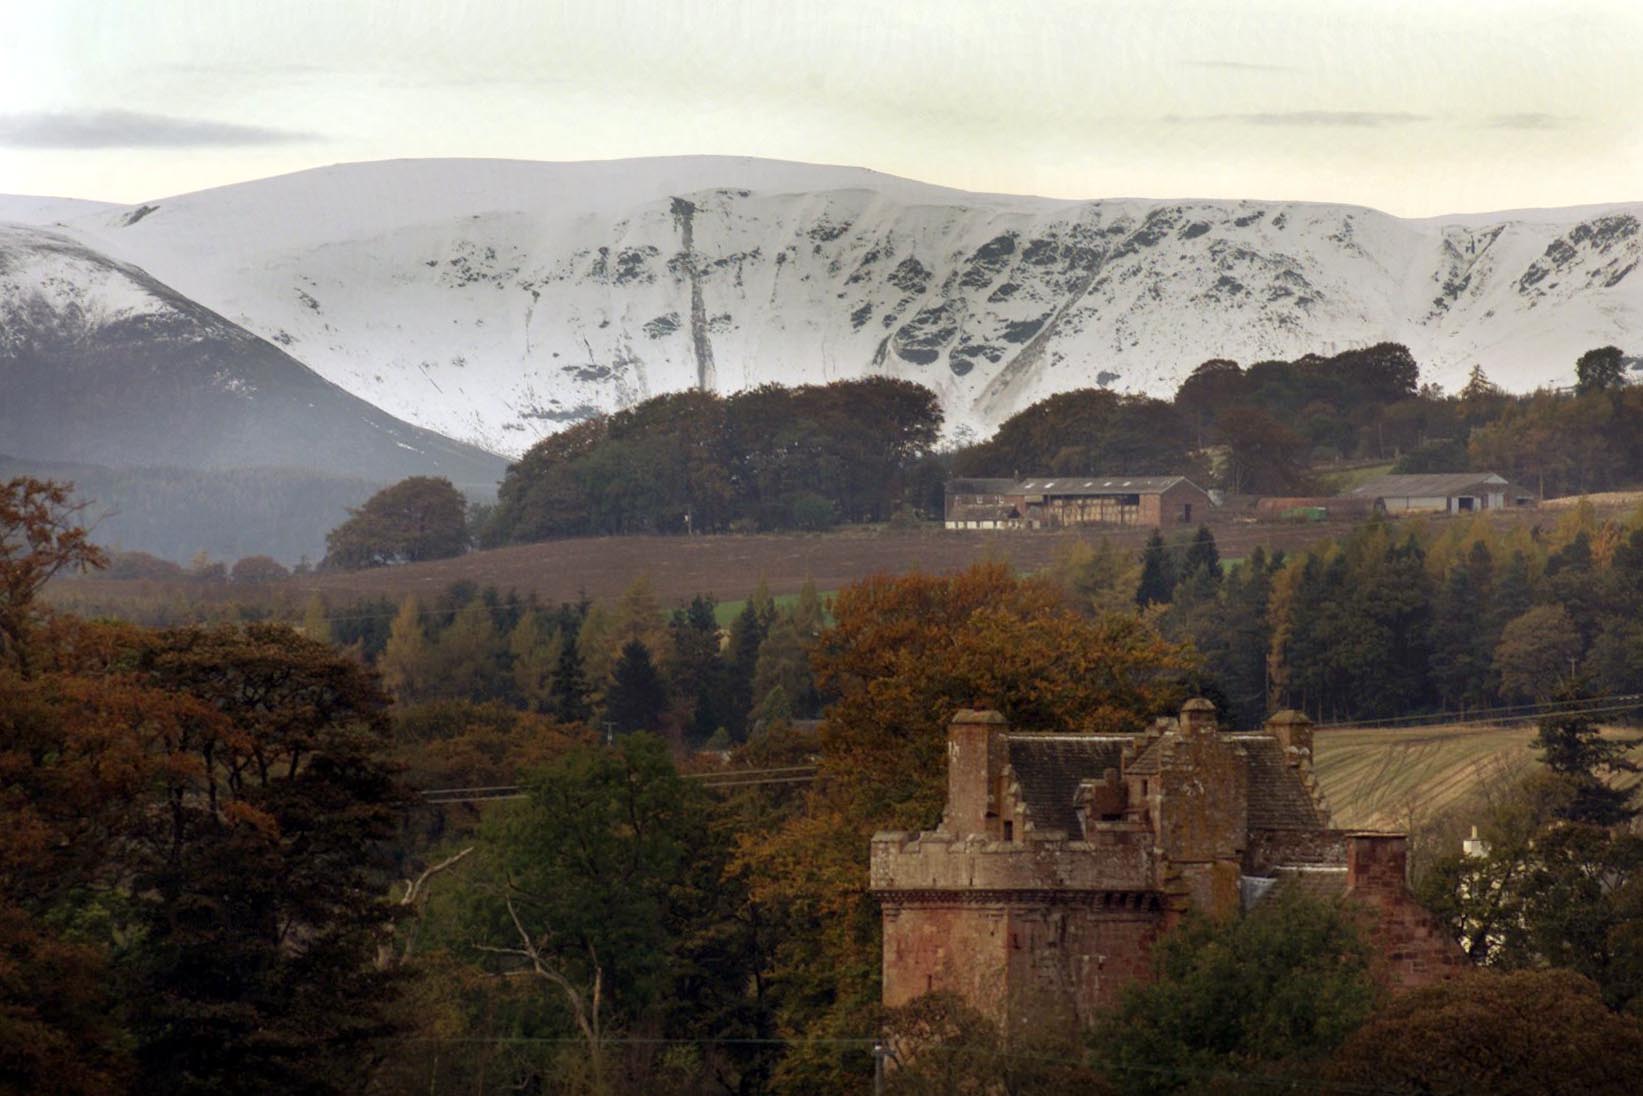 Looking North towards the snow covered Angus Glens, with Inverquharity Castle in the foreground.